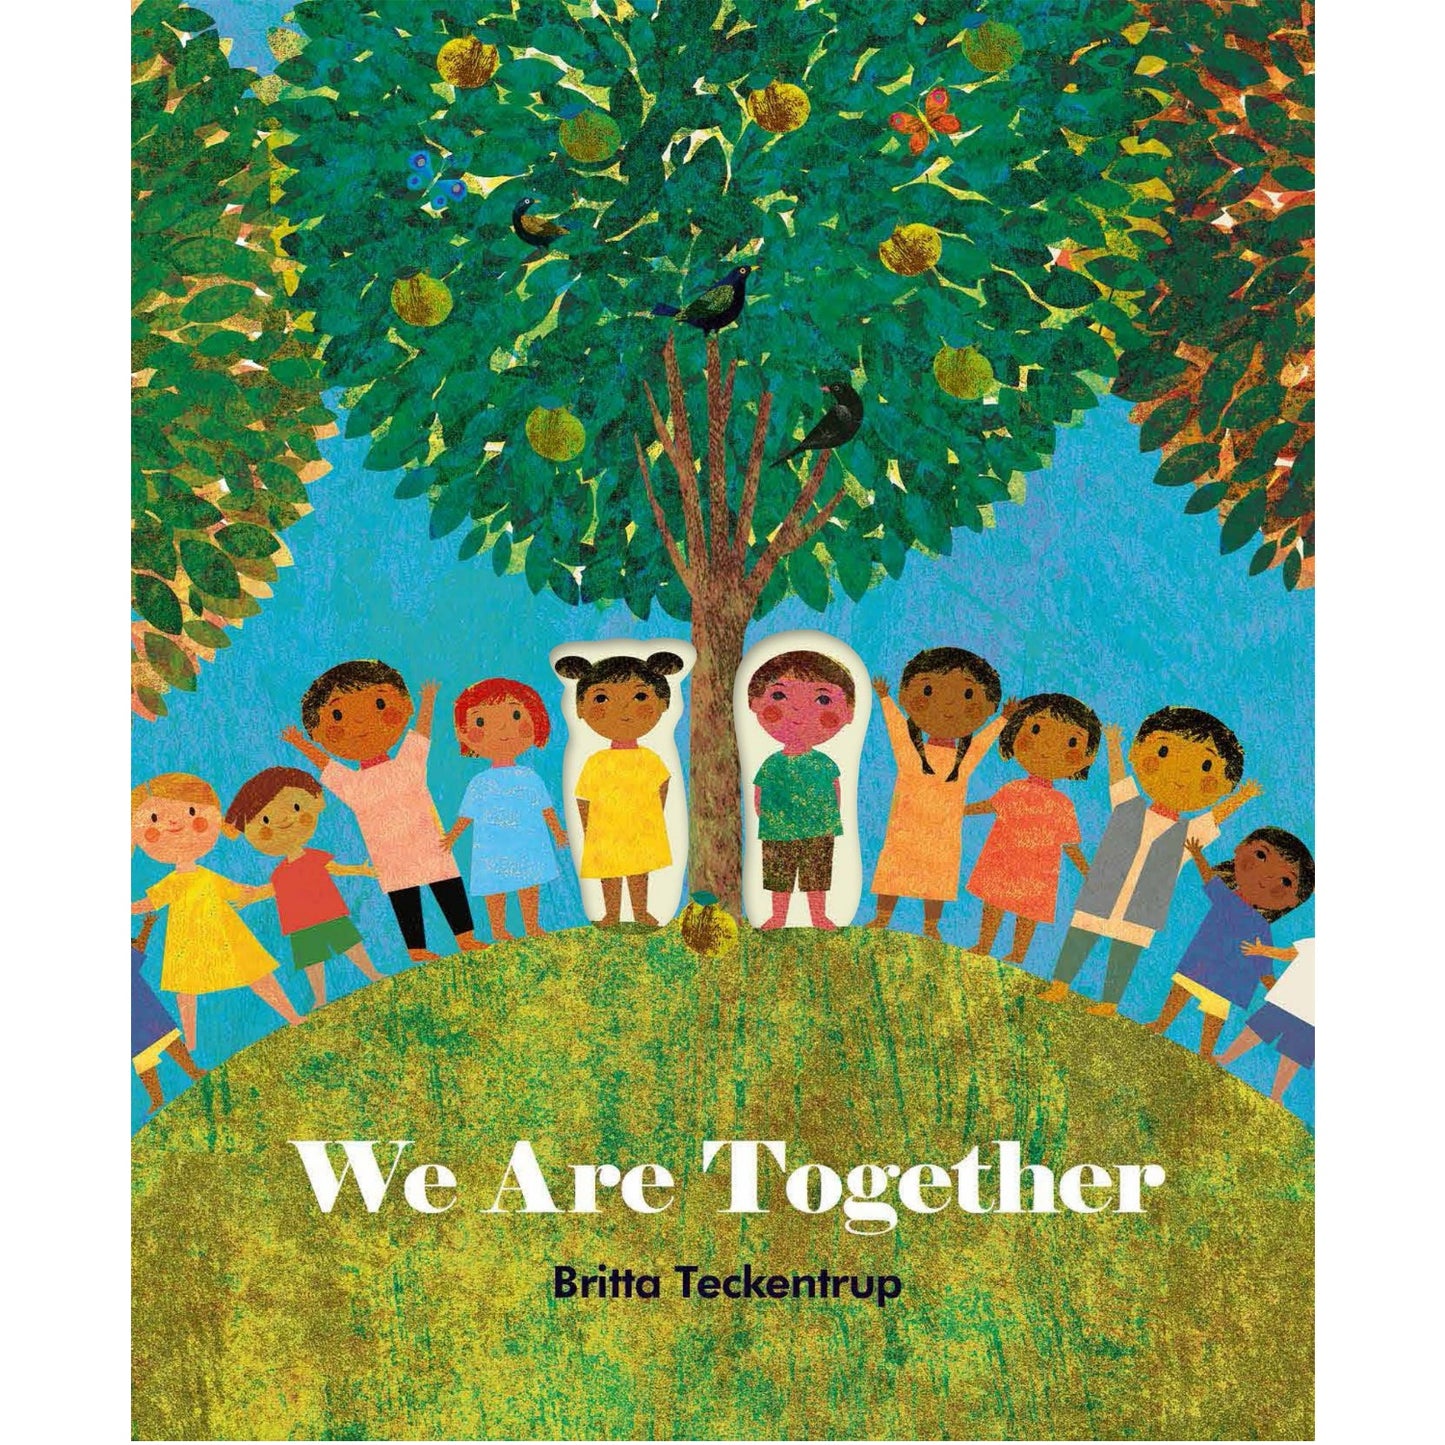 We Are Together | Children’s Book on Friendship